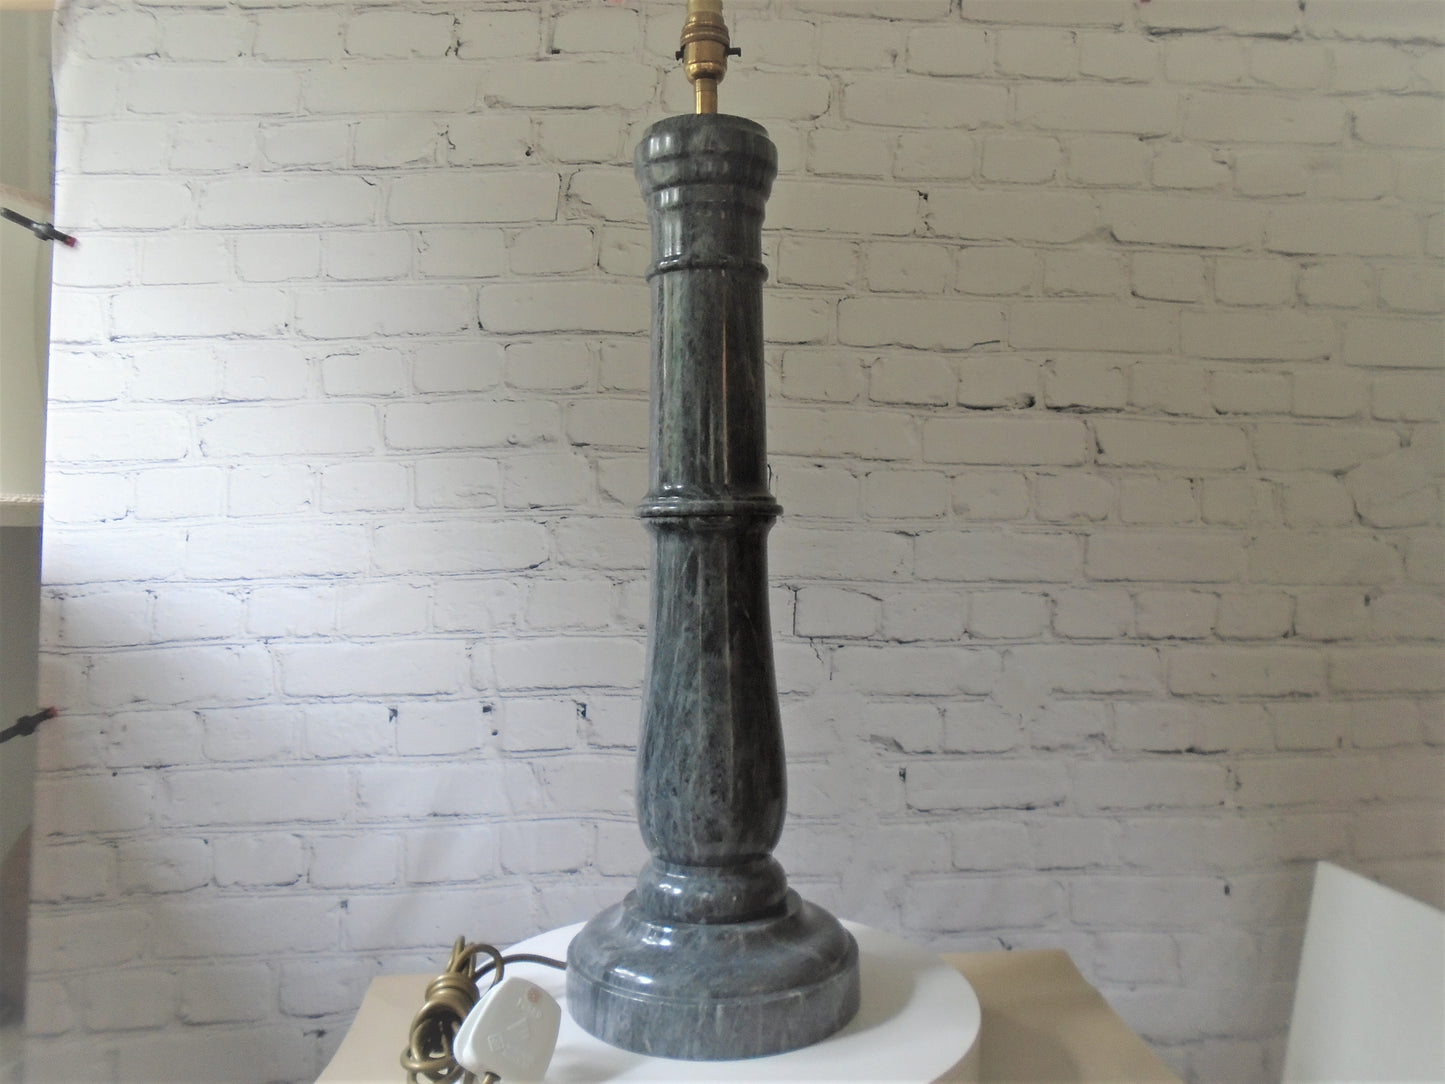 A Baluster Style Table Lamp Base